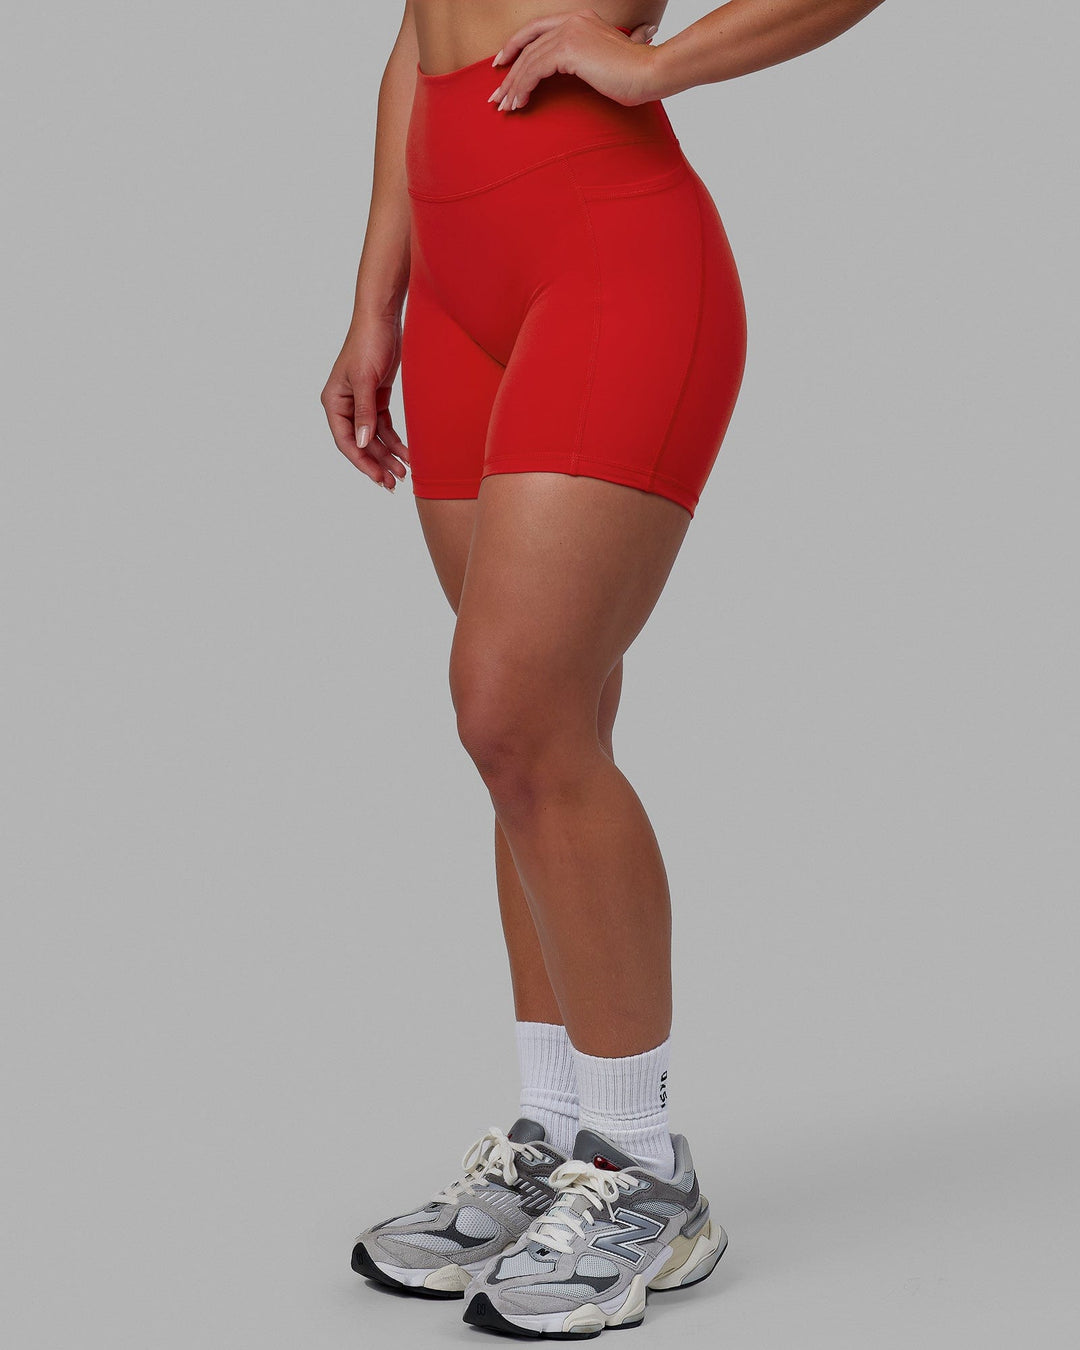 Fusion Mid-Length Shorts - Infrared